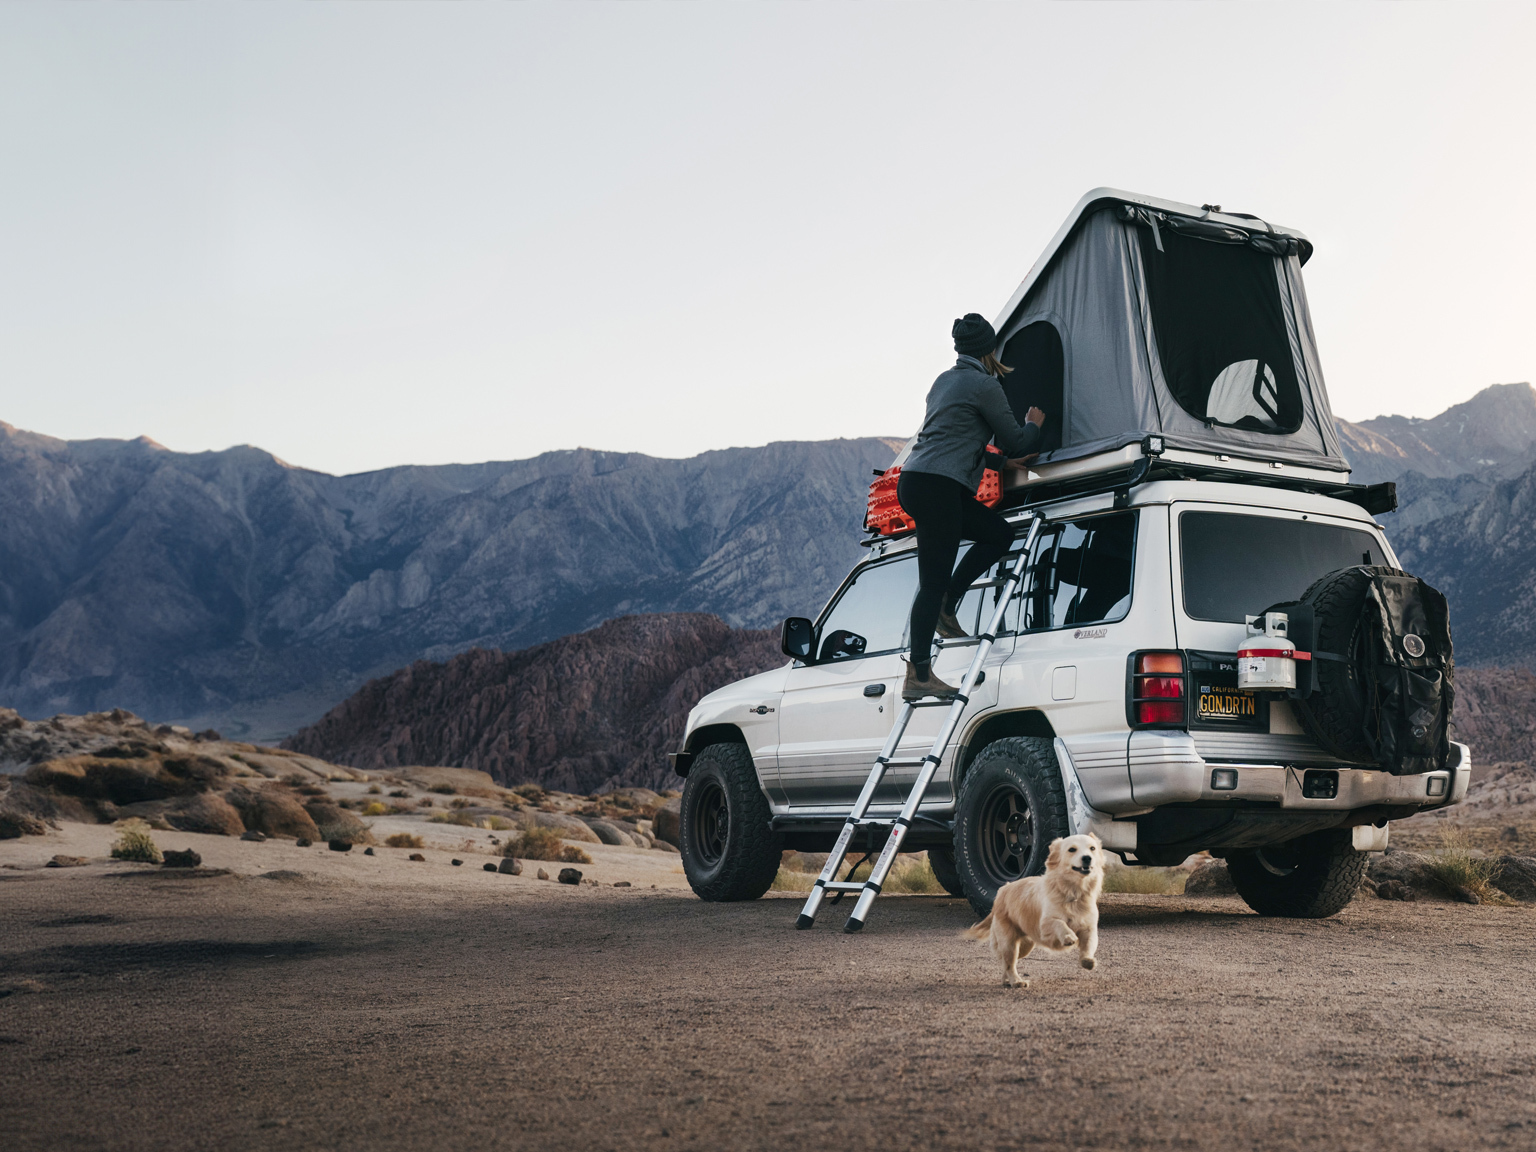 Landscape image showing car camping, with person and dog, and mountains in the background